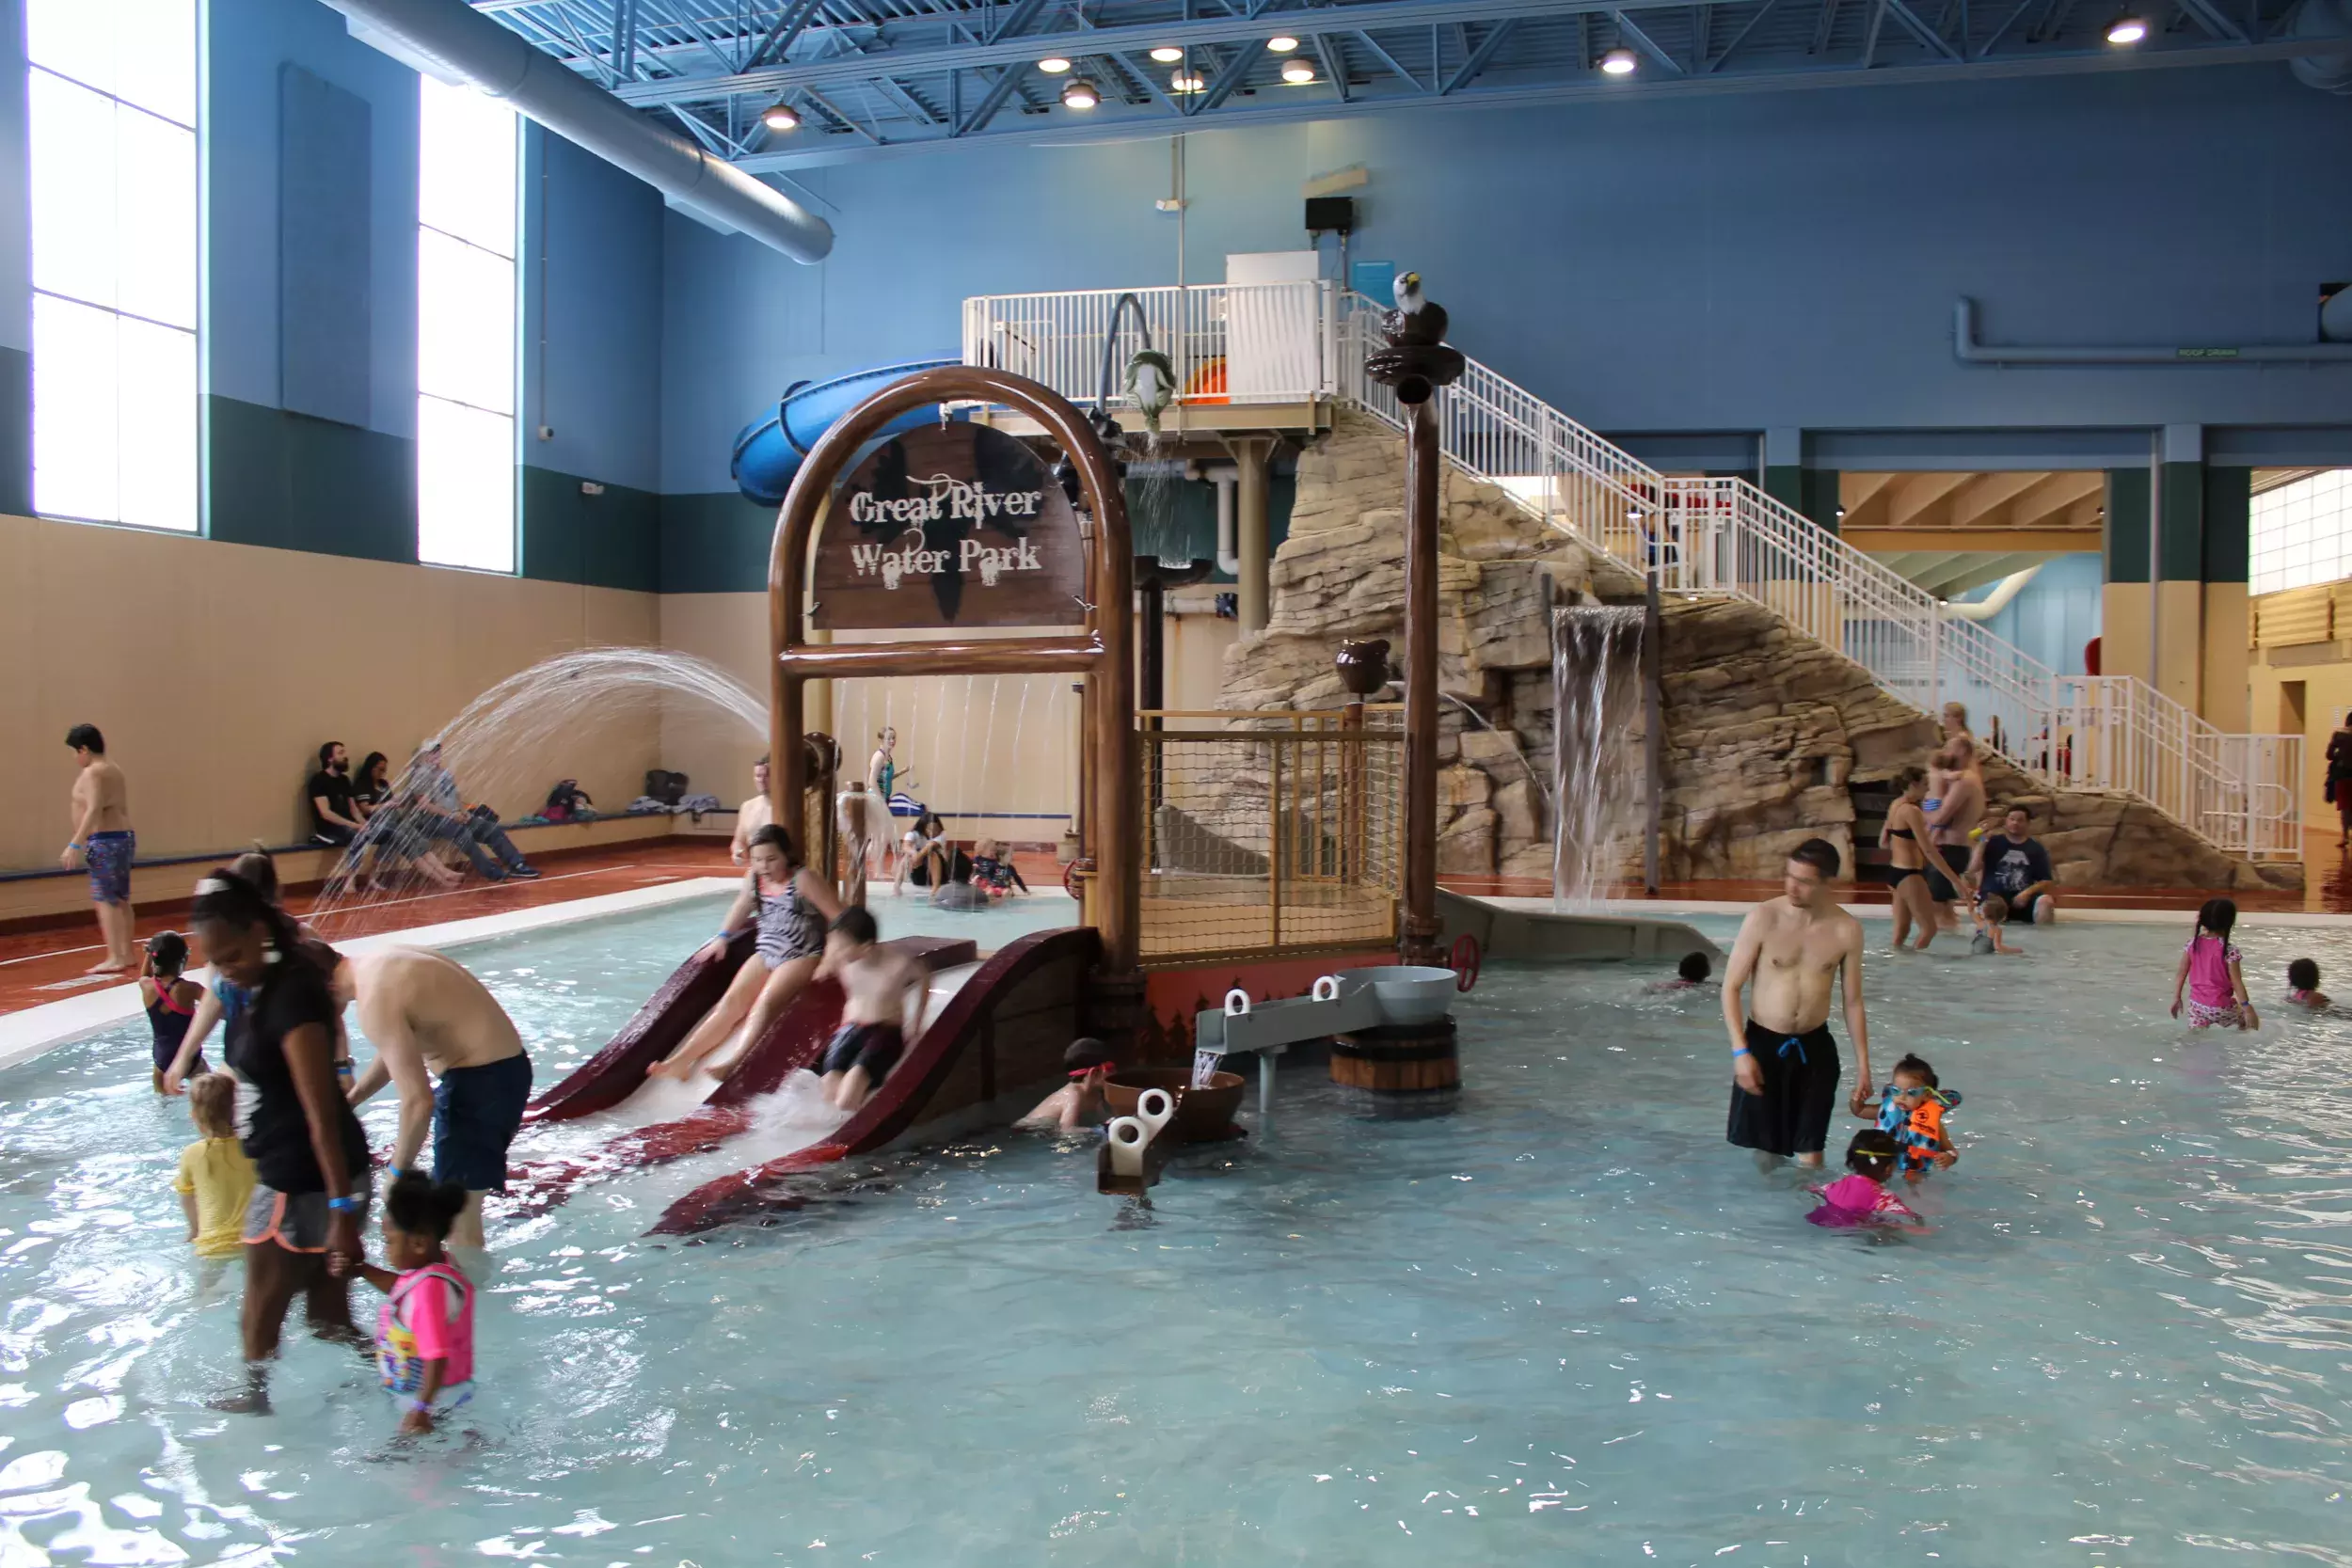 Children's splash pool with water slides and sign that reads "Great River Water Park ".